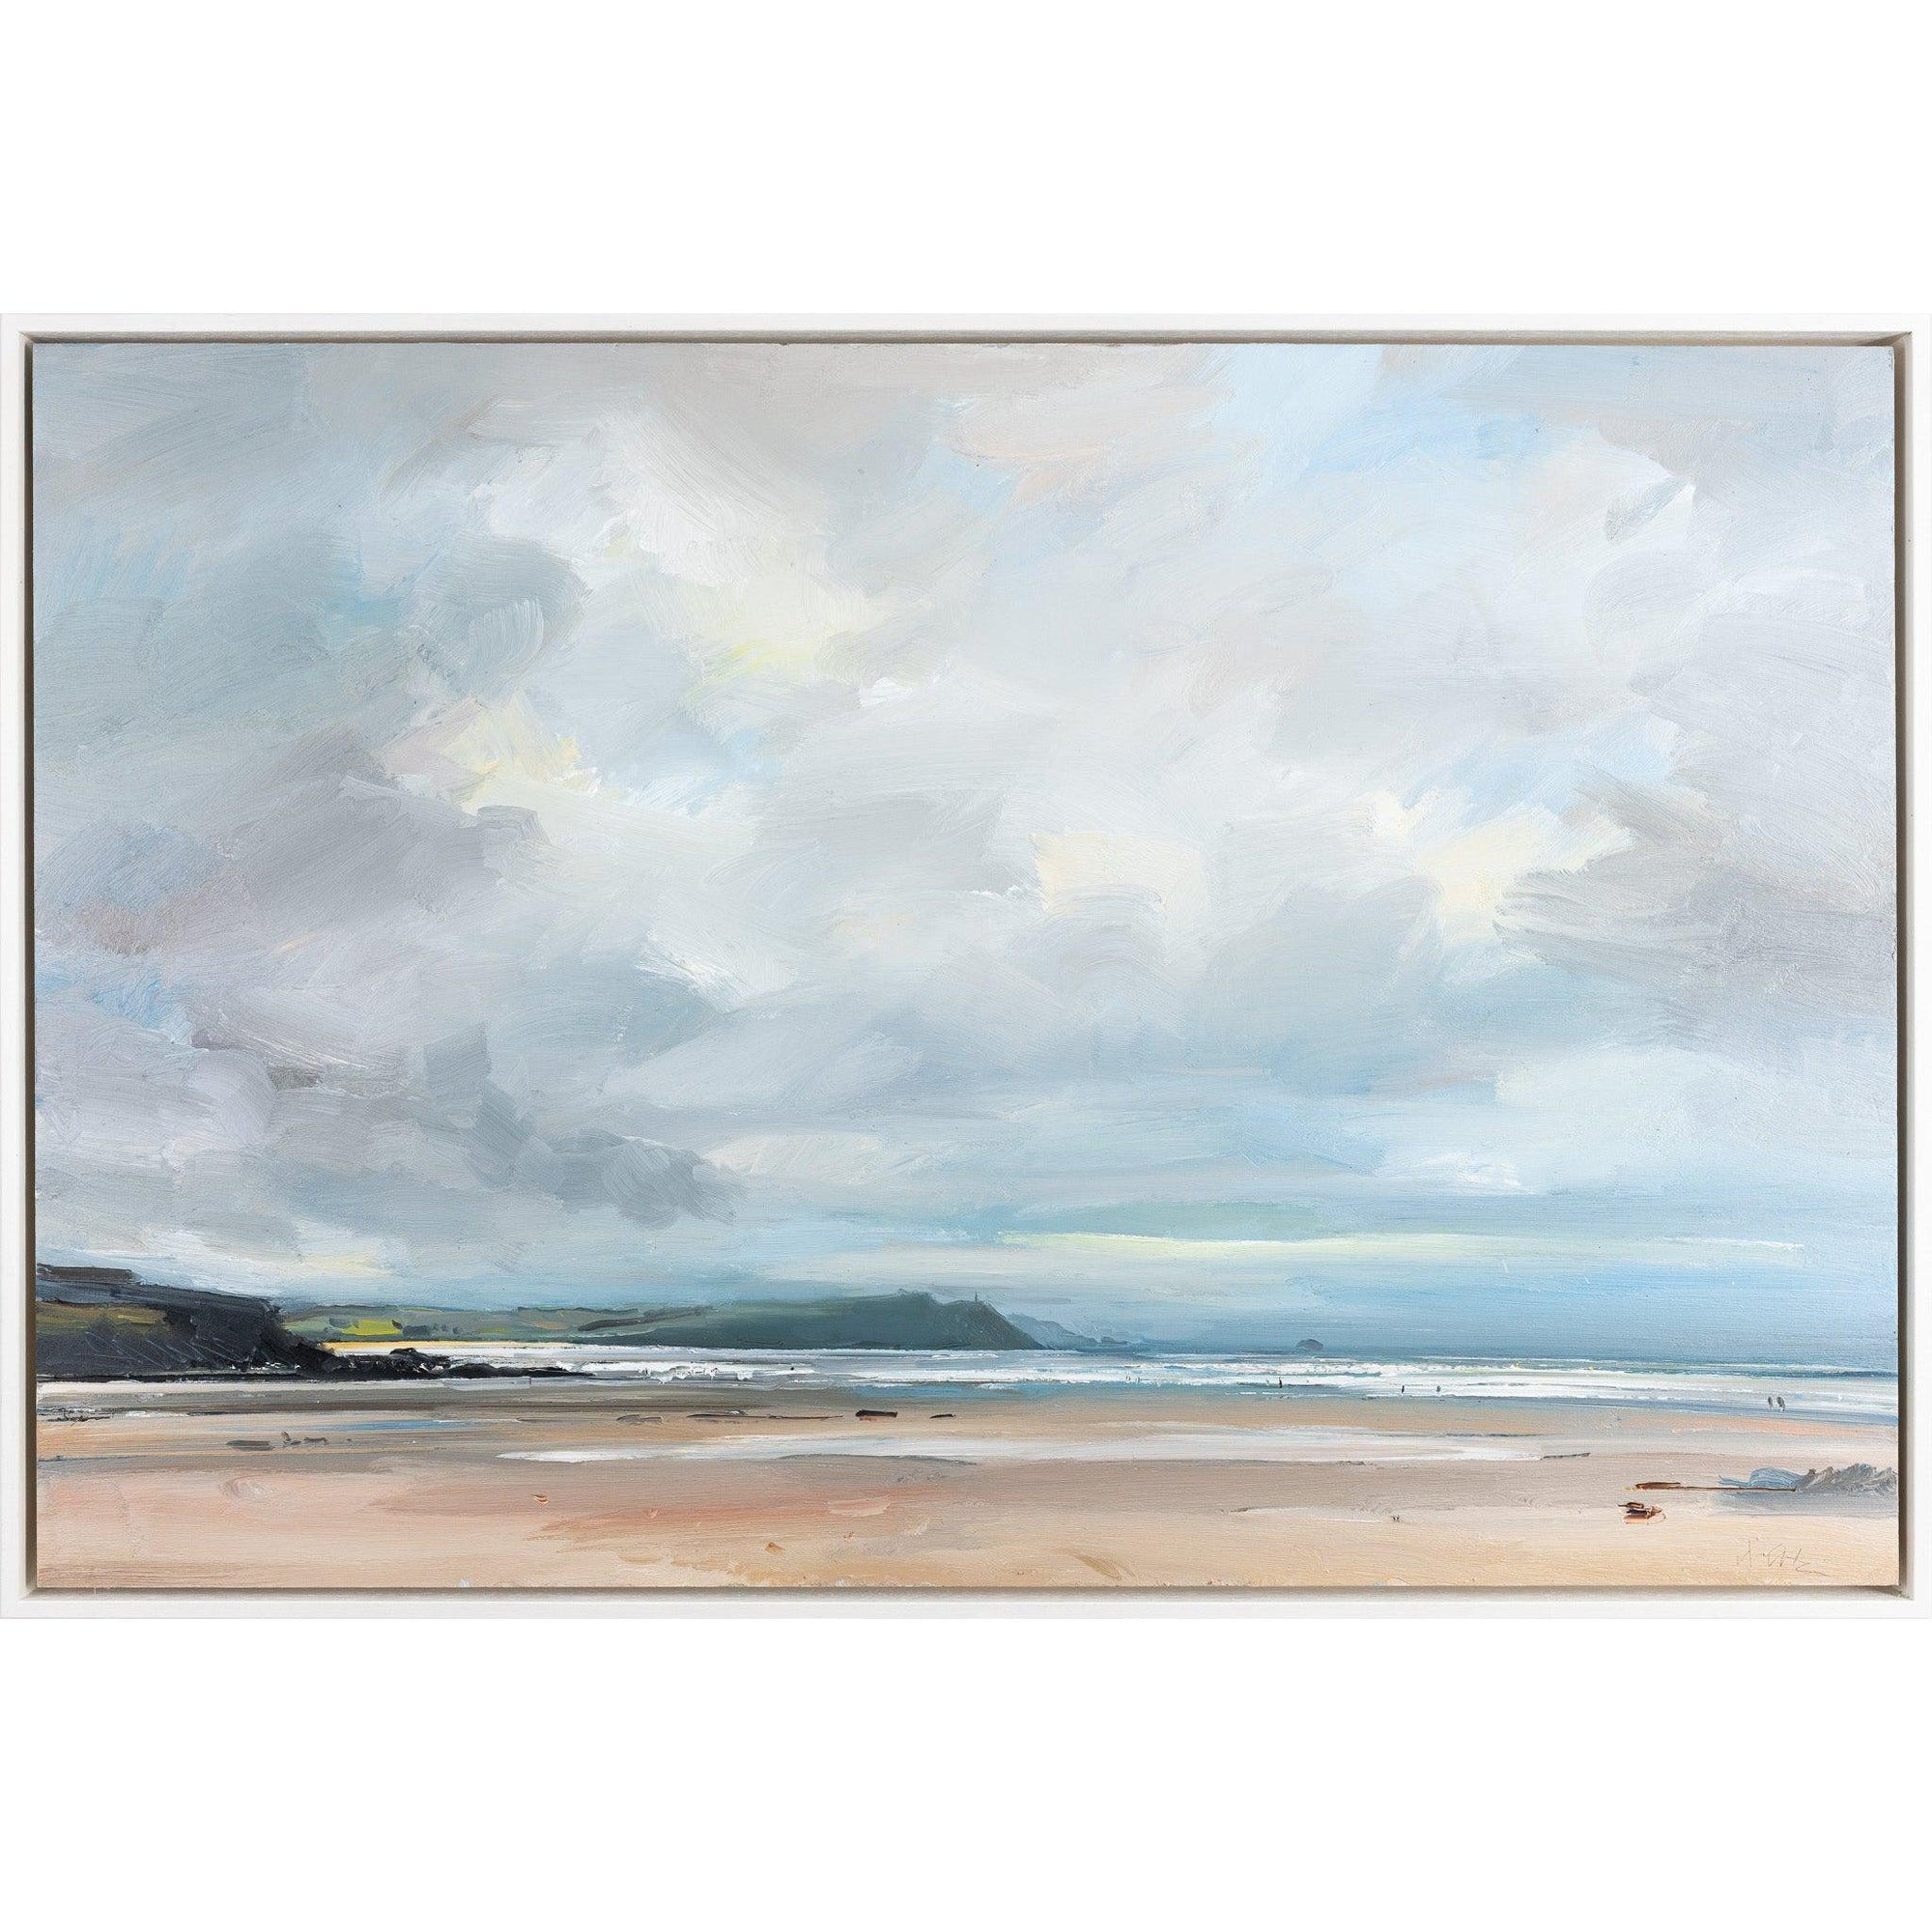 ‘Polzeath Beach on an Autumn day' oil on board original by David Atkins, available at Padstow Gallery, Cornwall